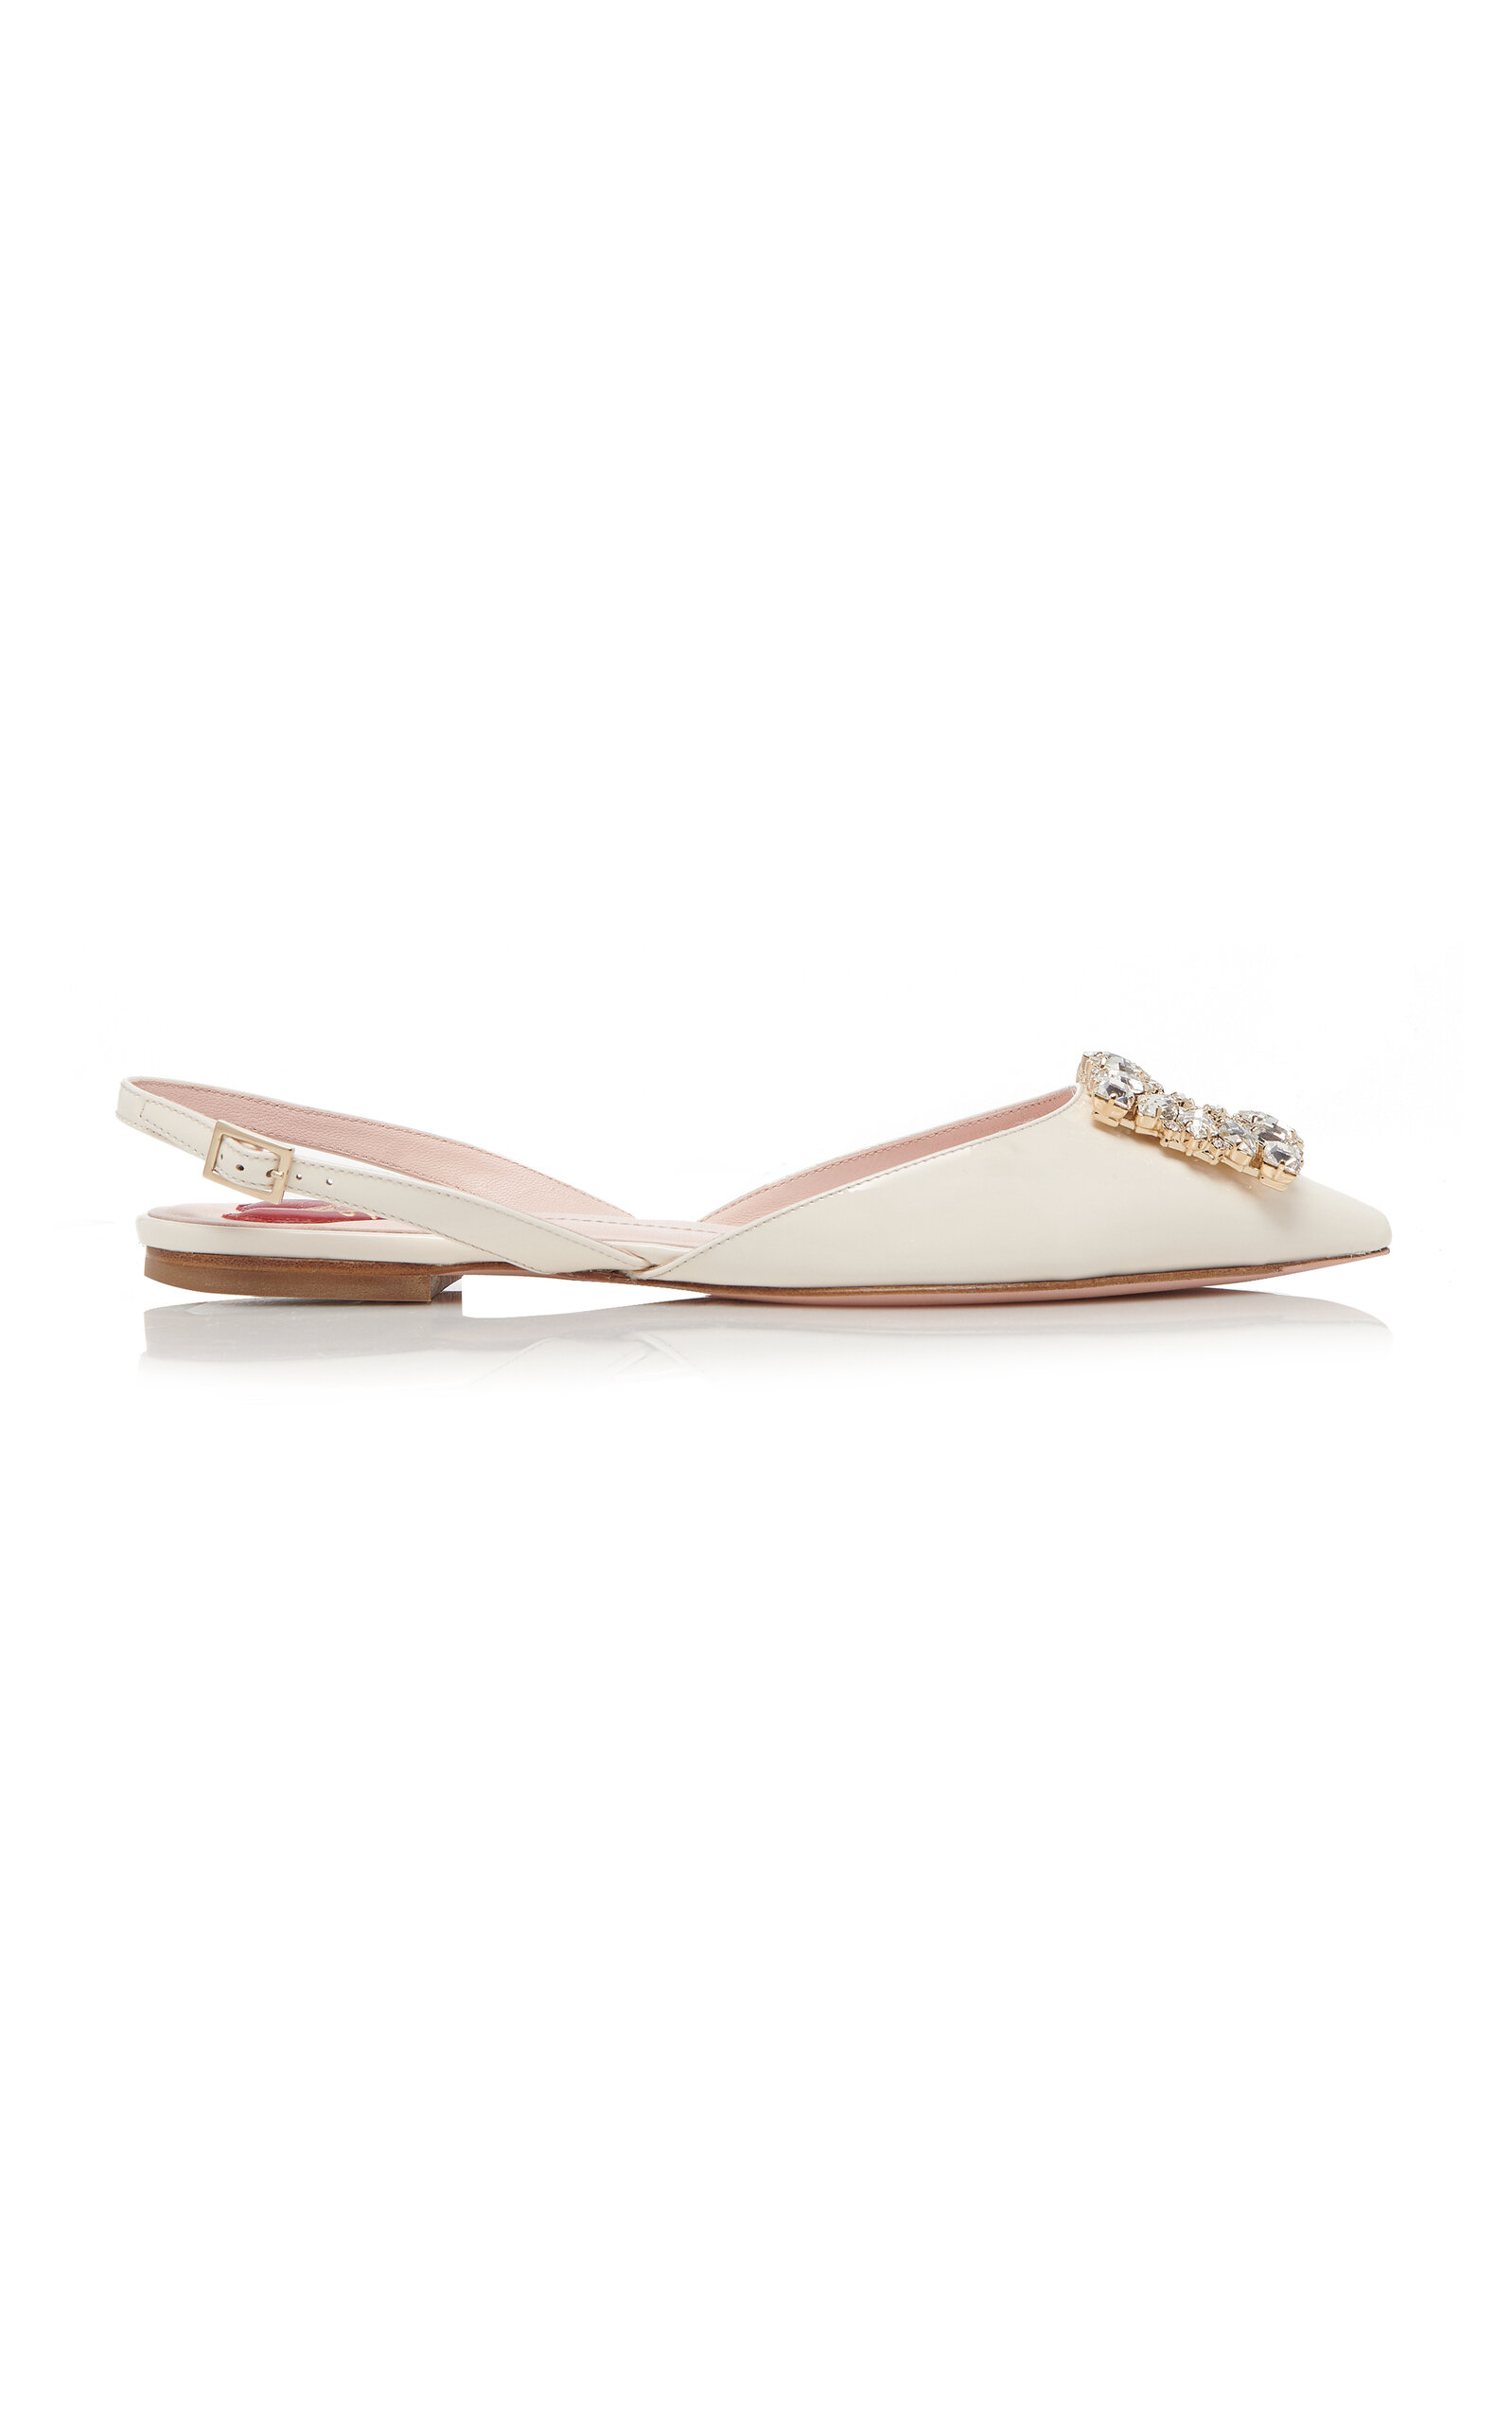 ROGER VIVIER BUCKLE-DETAILED PATENT LEATHER FLATS